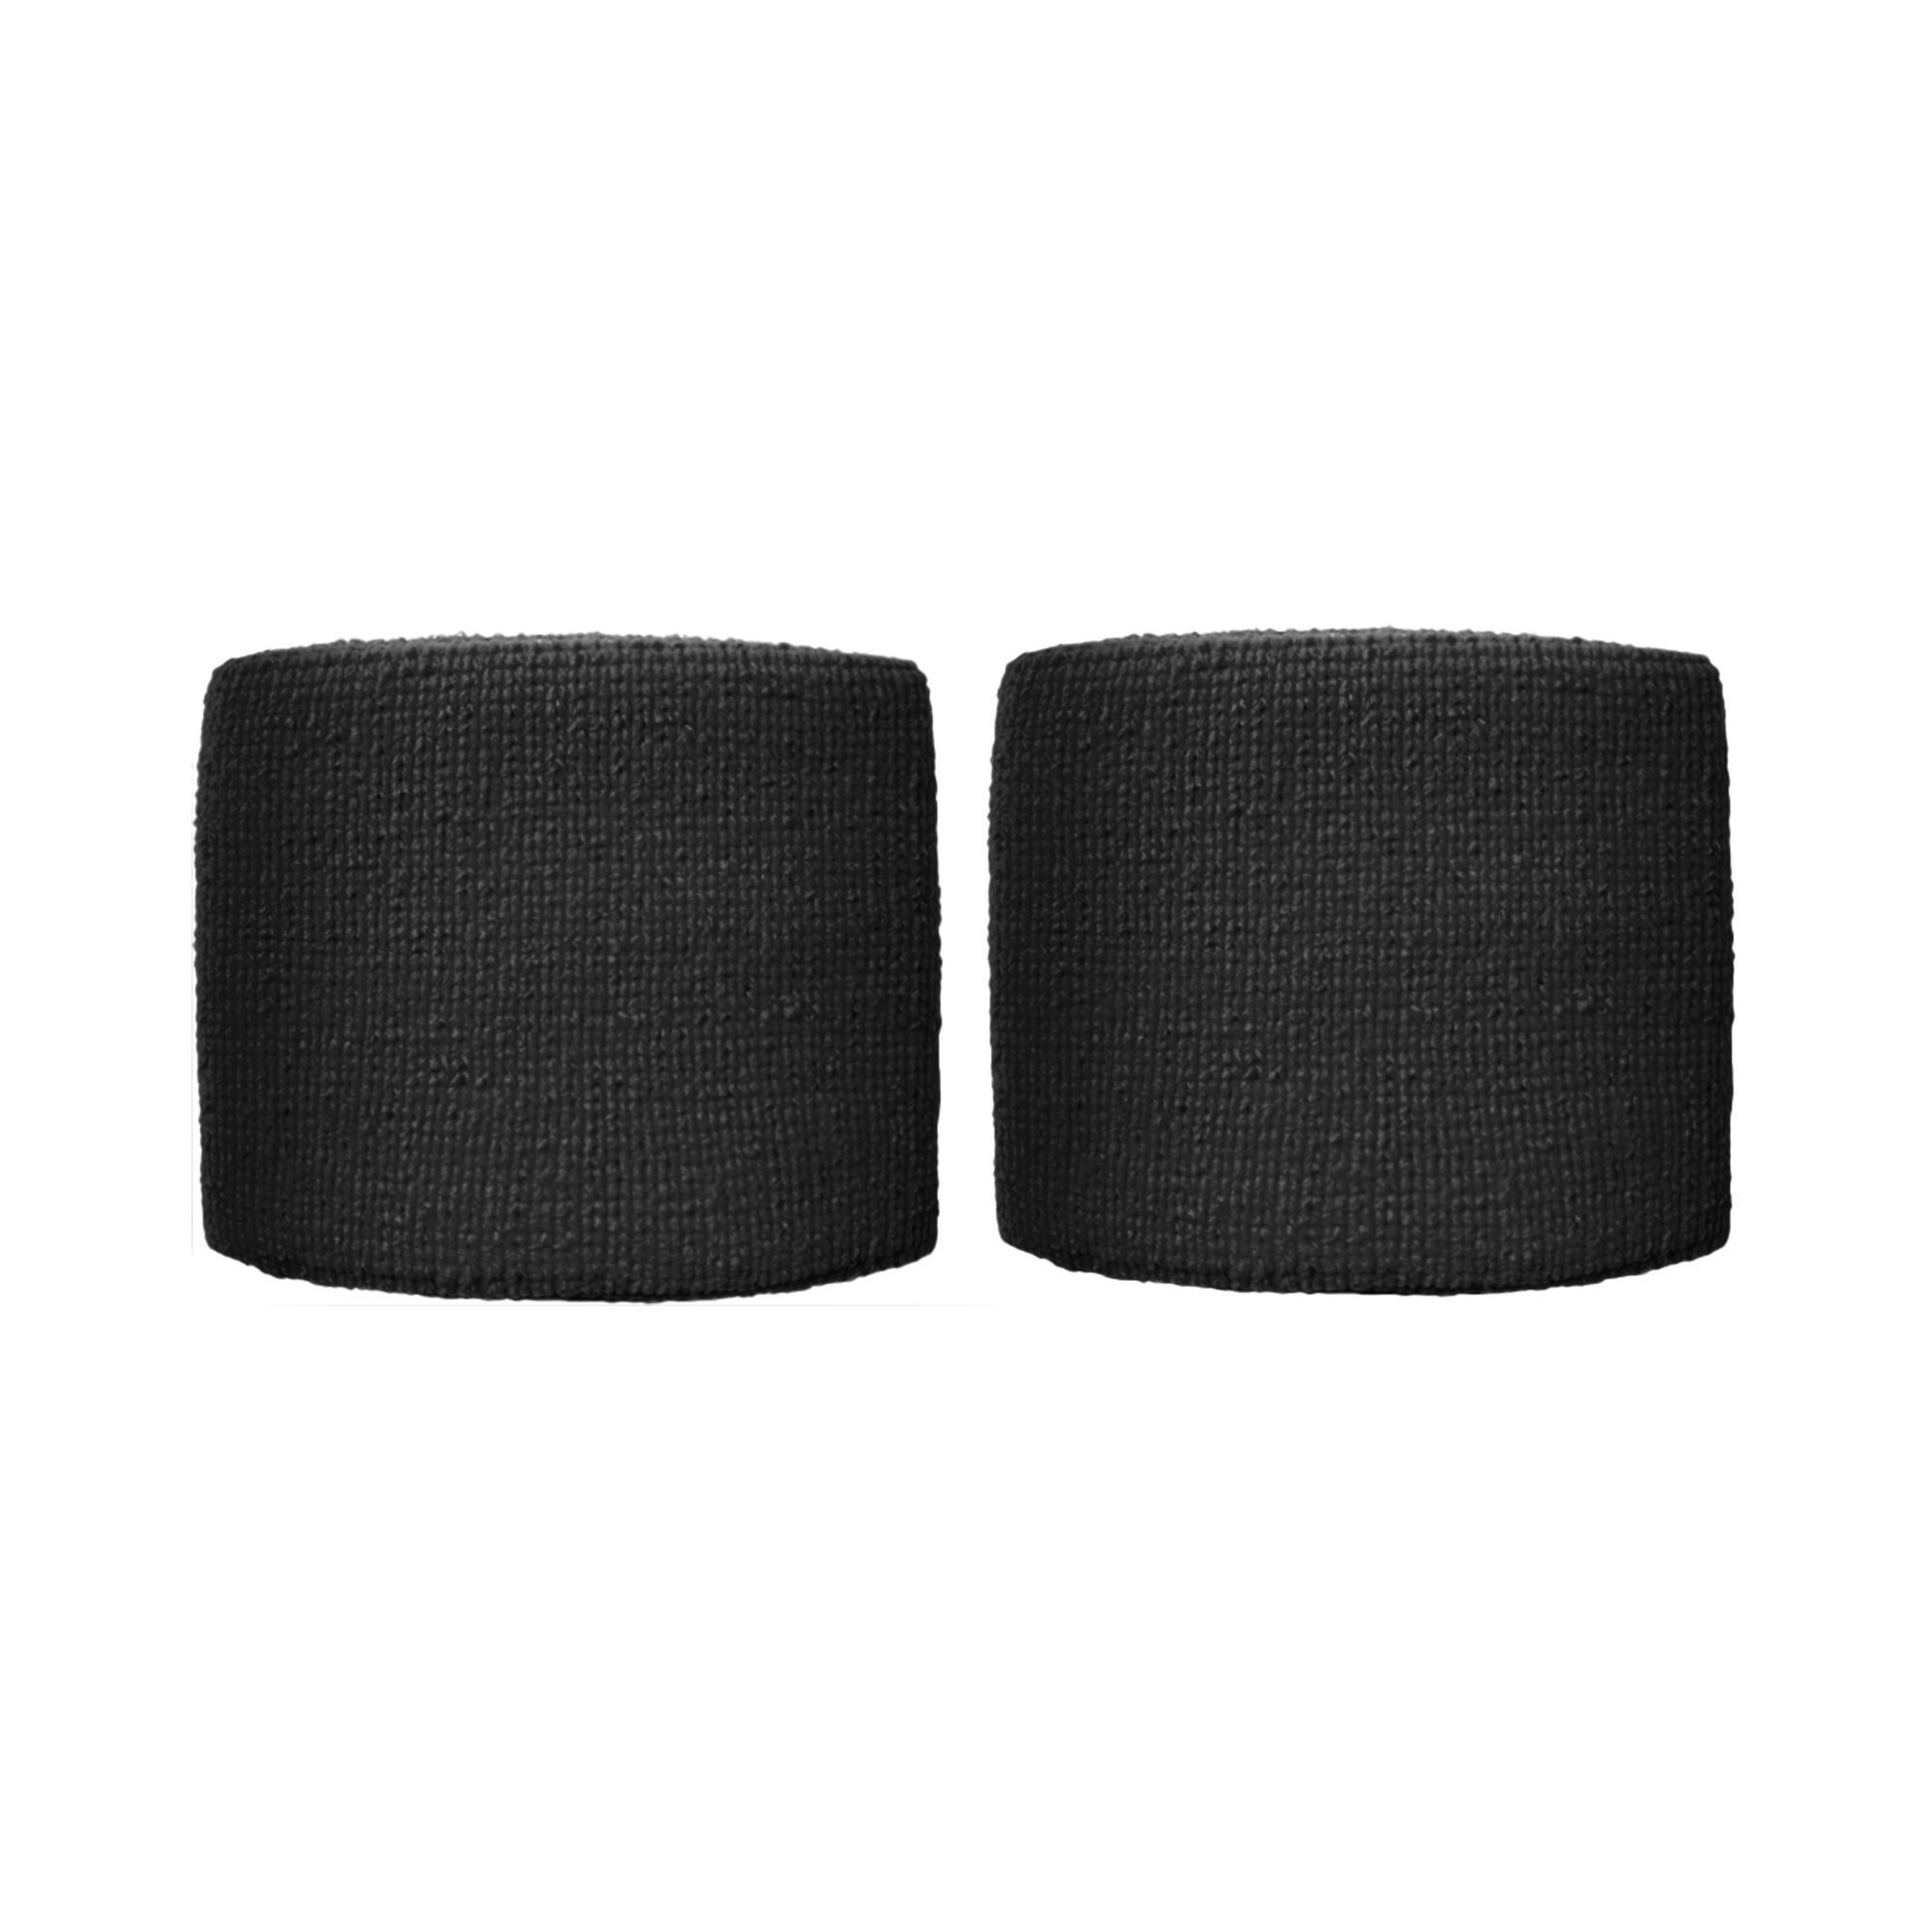  PAFUWEI Black Sports Wristbands, 2 Pieces Elastic